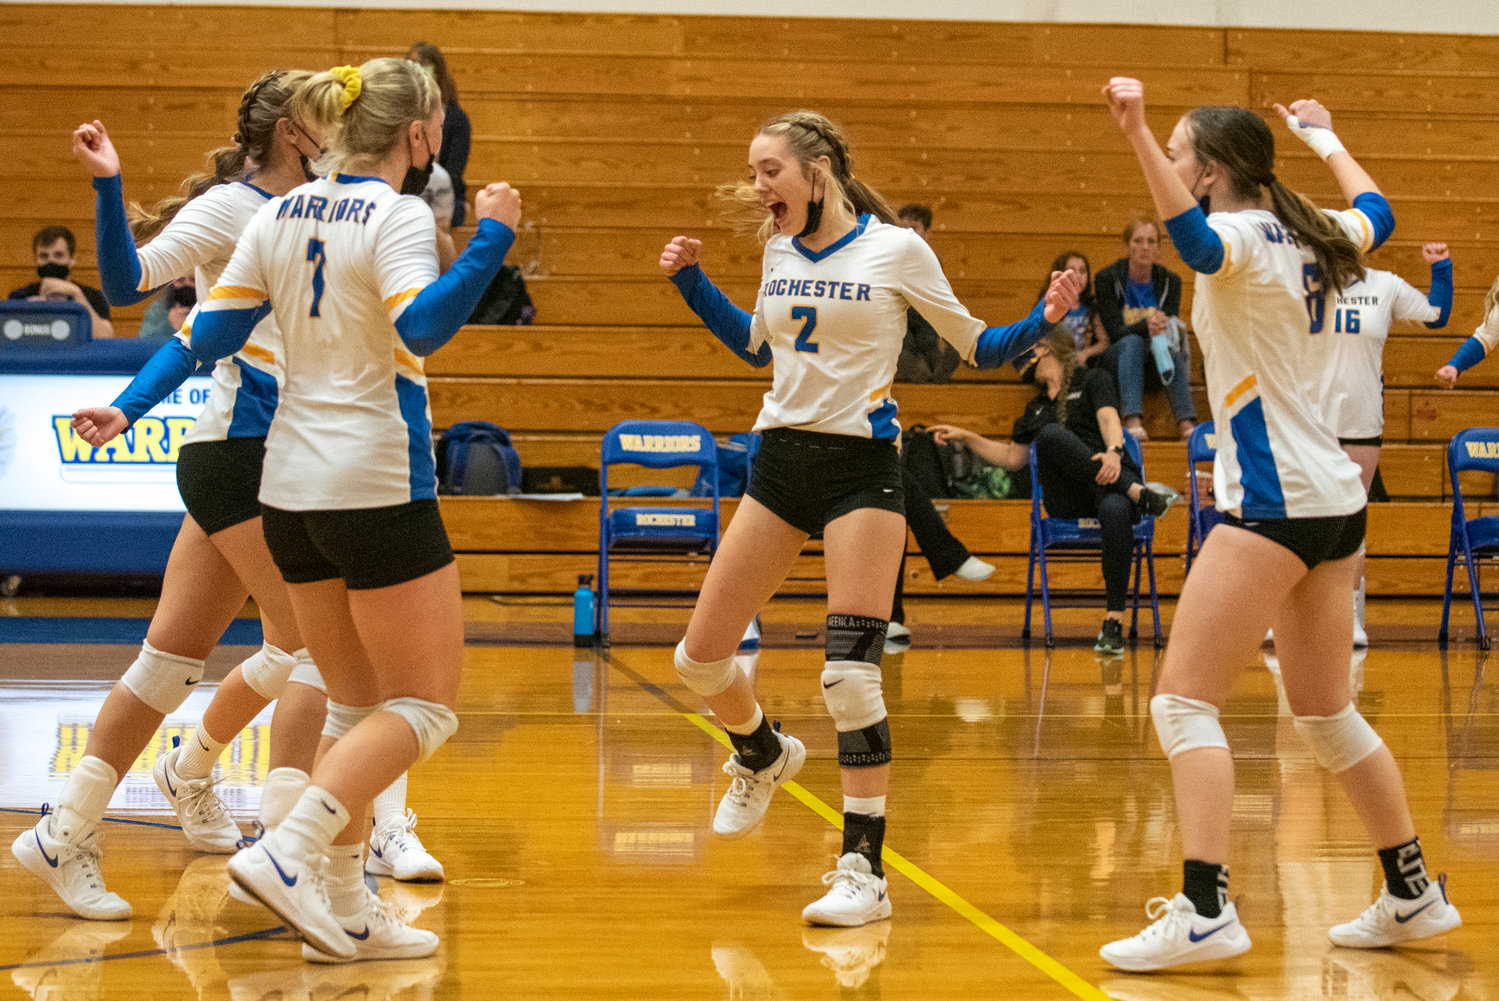 FILE PHOTO -- Rochester celebrate a point against Montesano earlier this season.